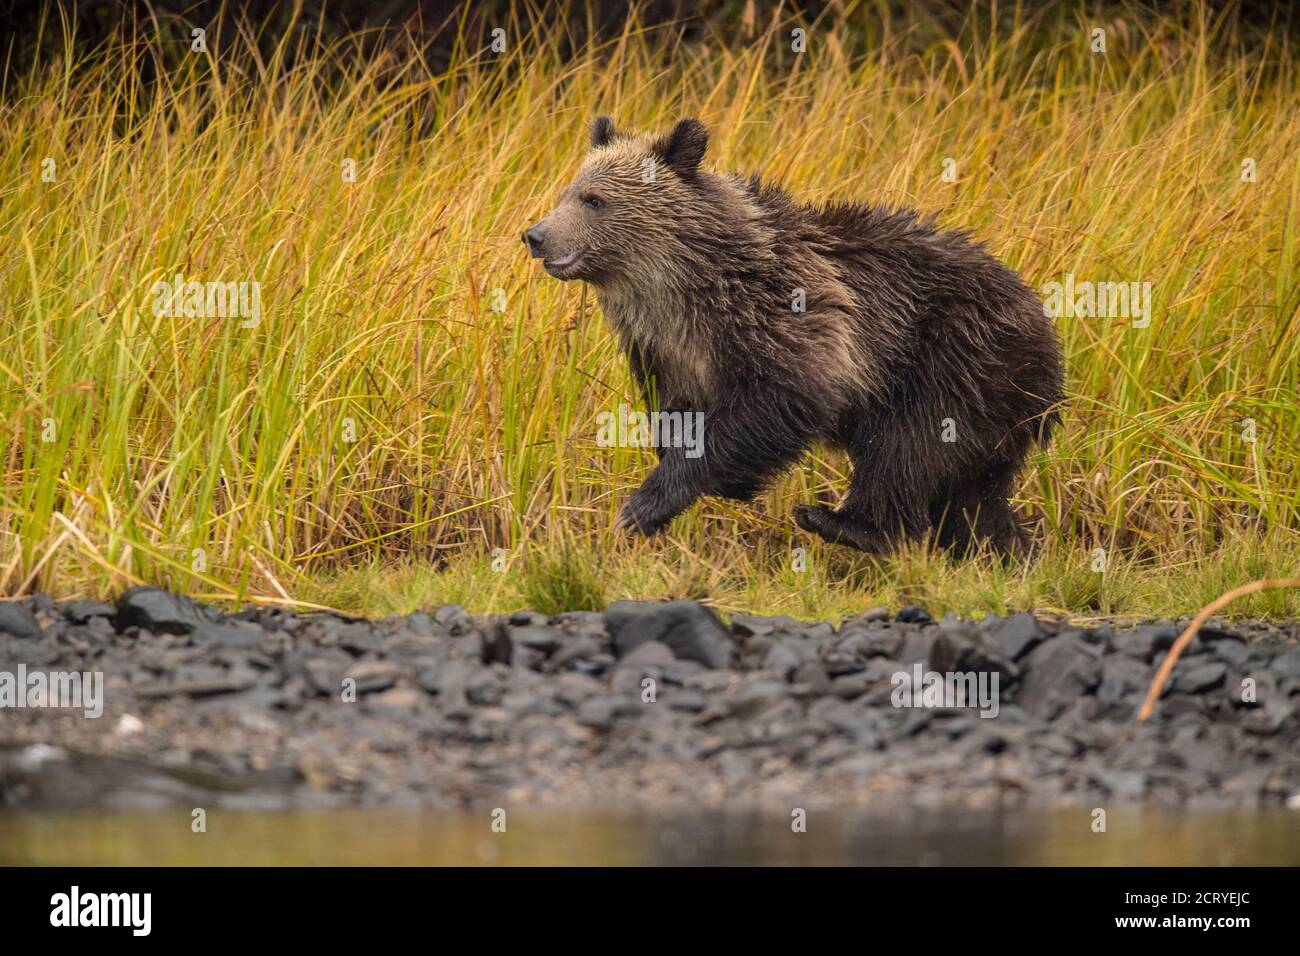 Grizzly bear (Ursus arctos) First-year cub following mother along shore of a salmon river, Chilcotin Wilderness, BC Interior, Canada Stock Photo